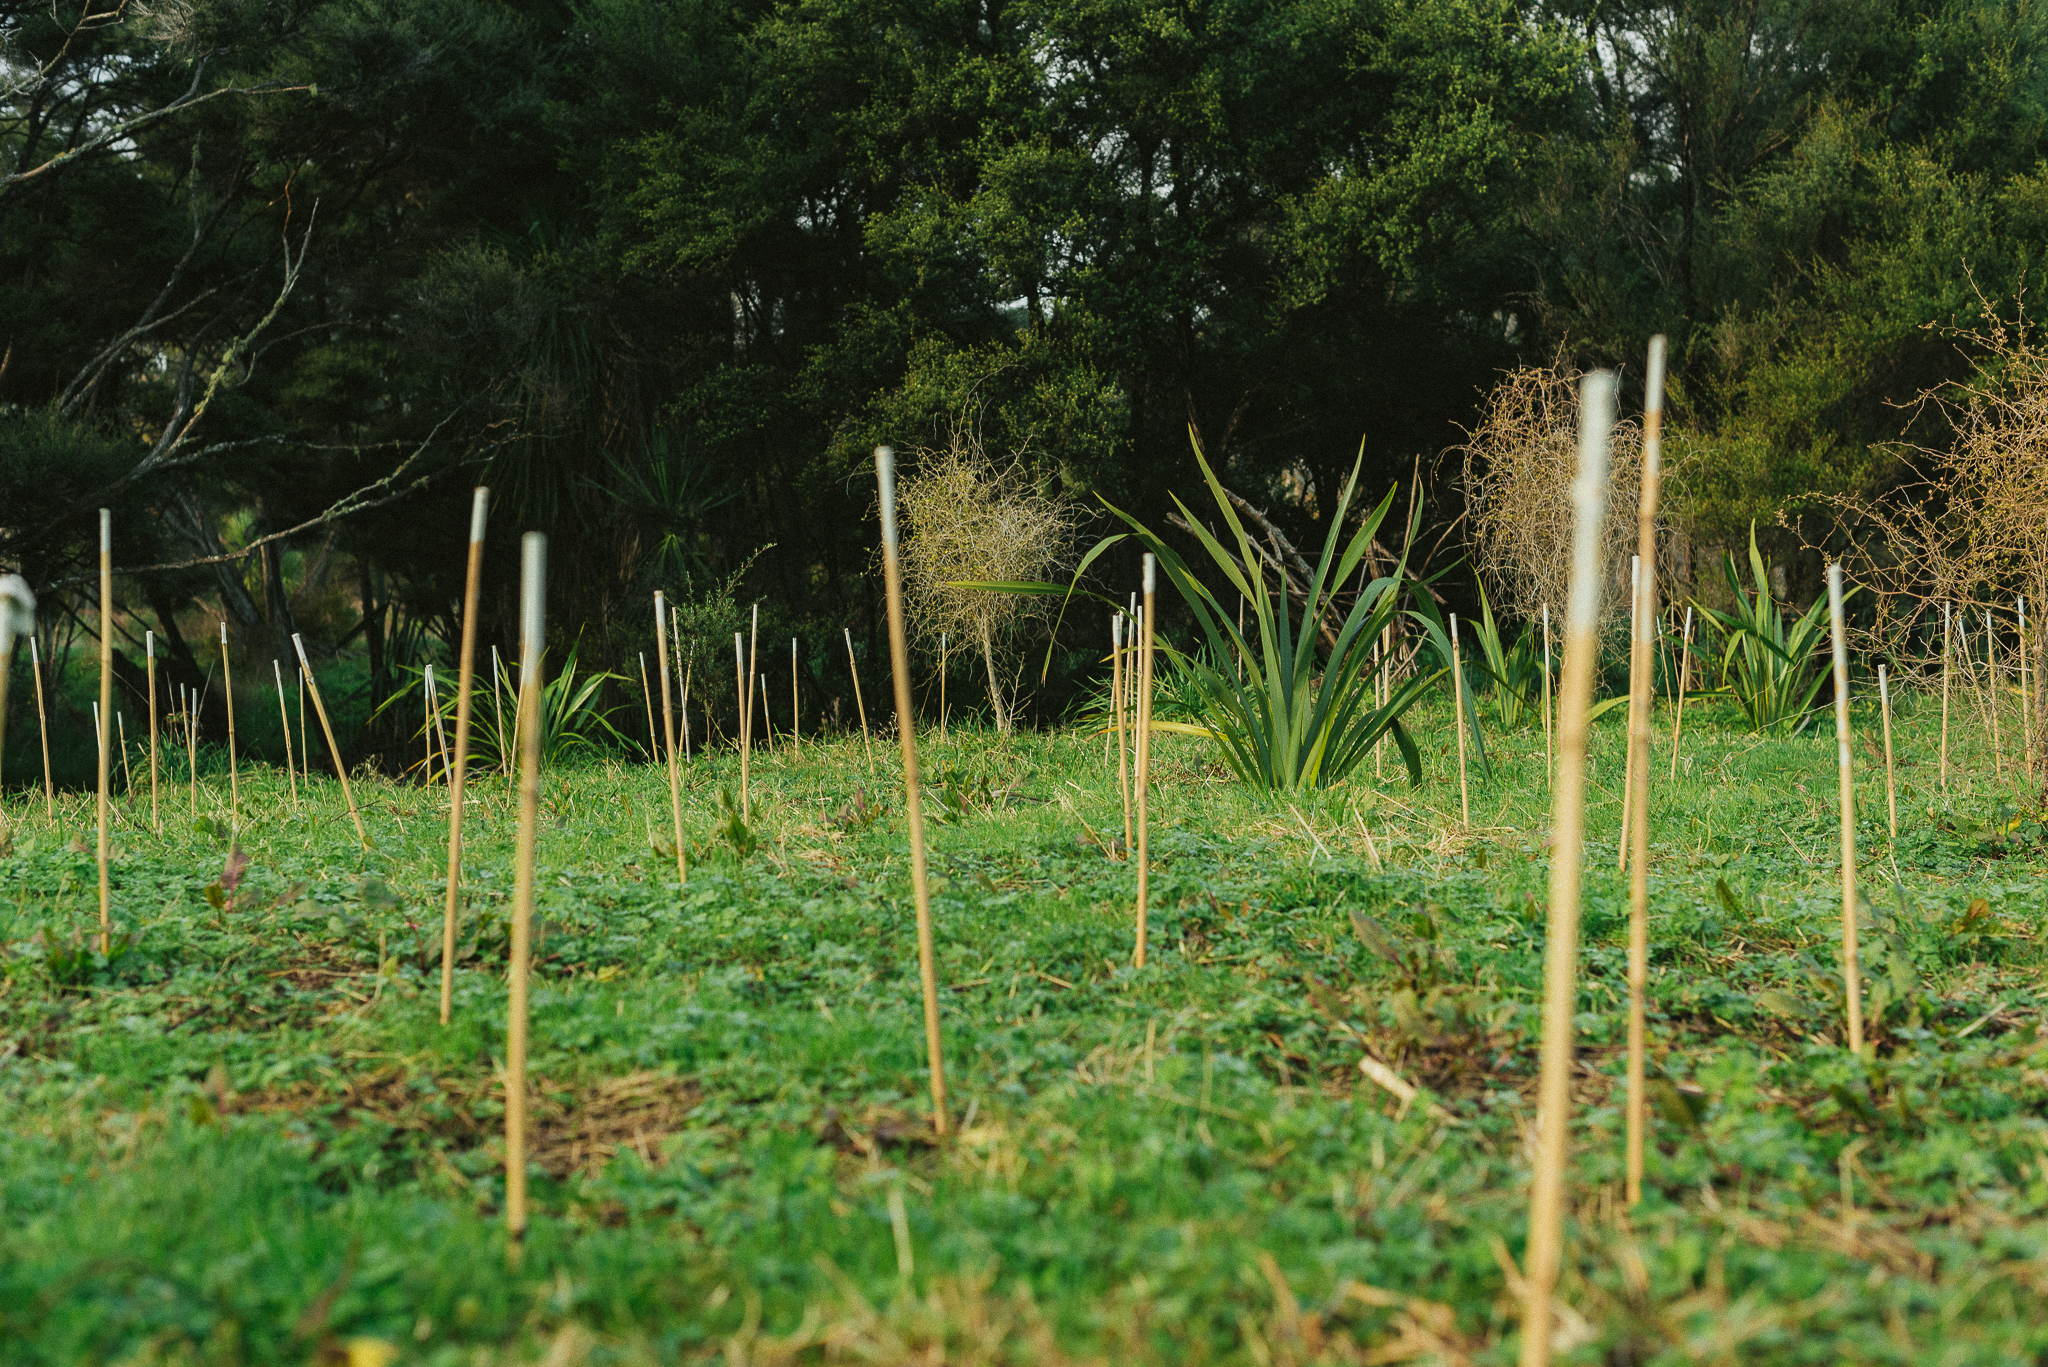 Stakes in ground showing location of new plantings with larger flax in background